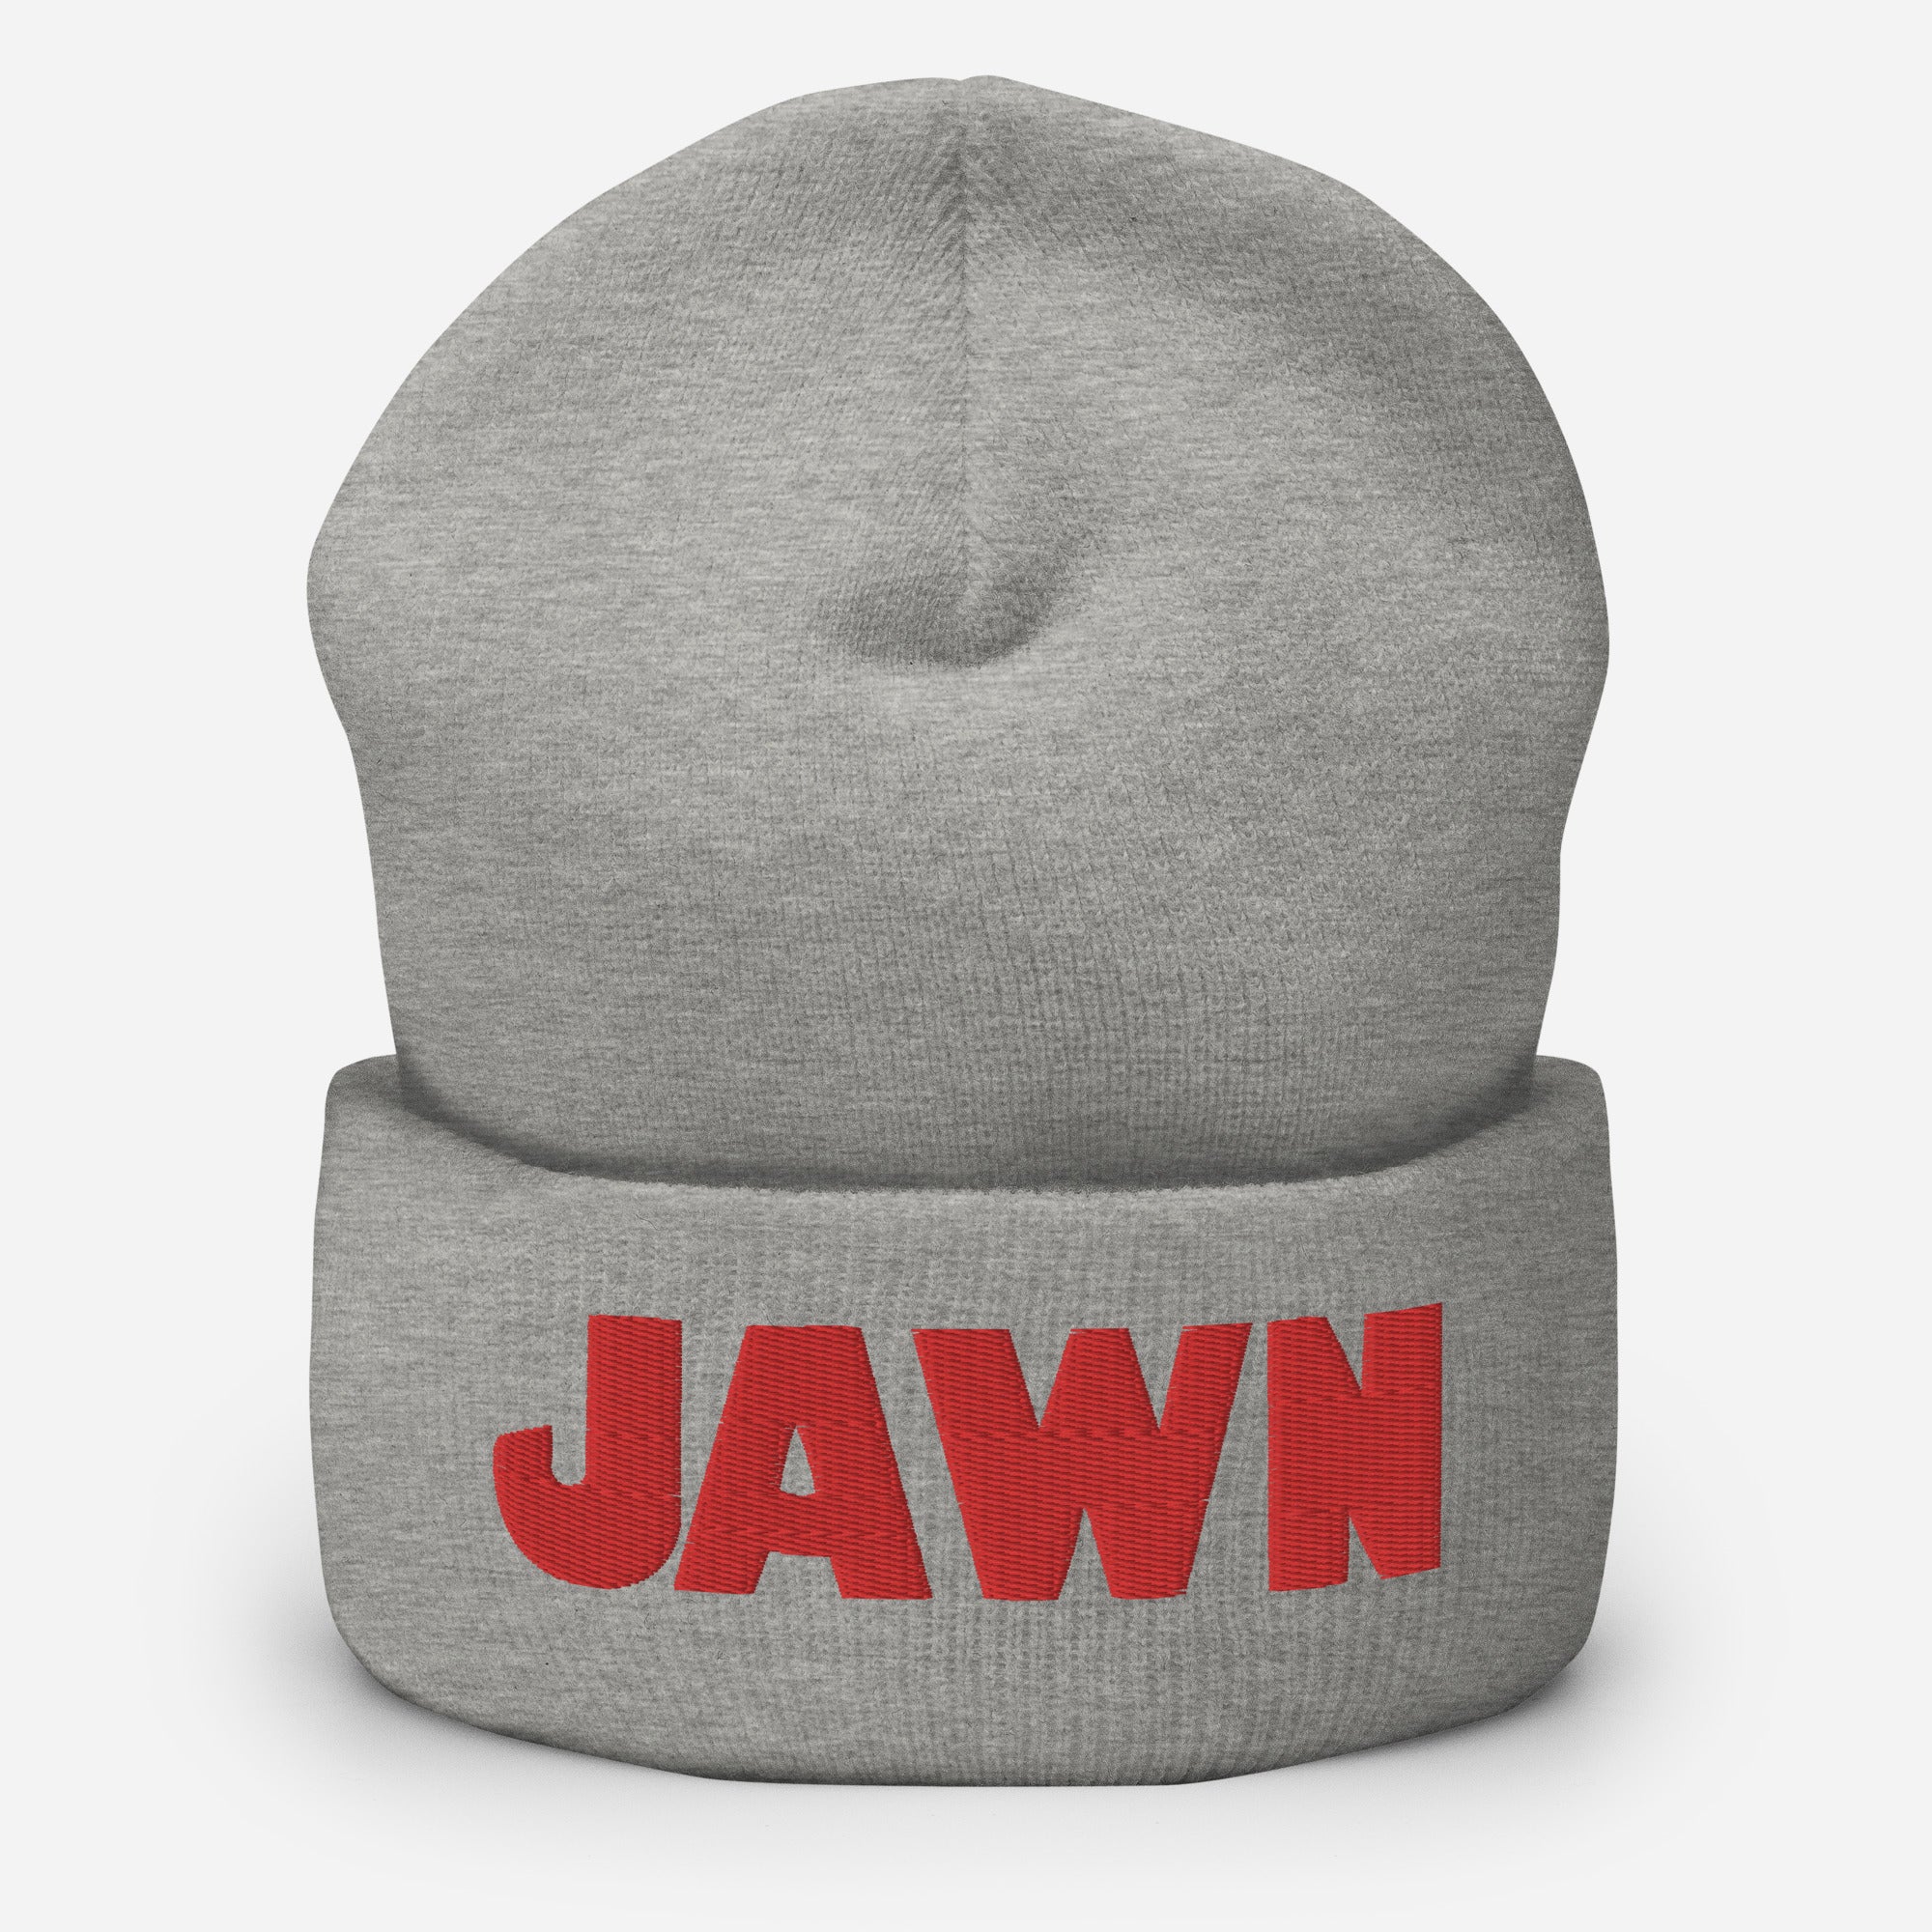 "Jaws Jawn" Knit Hat